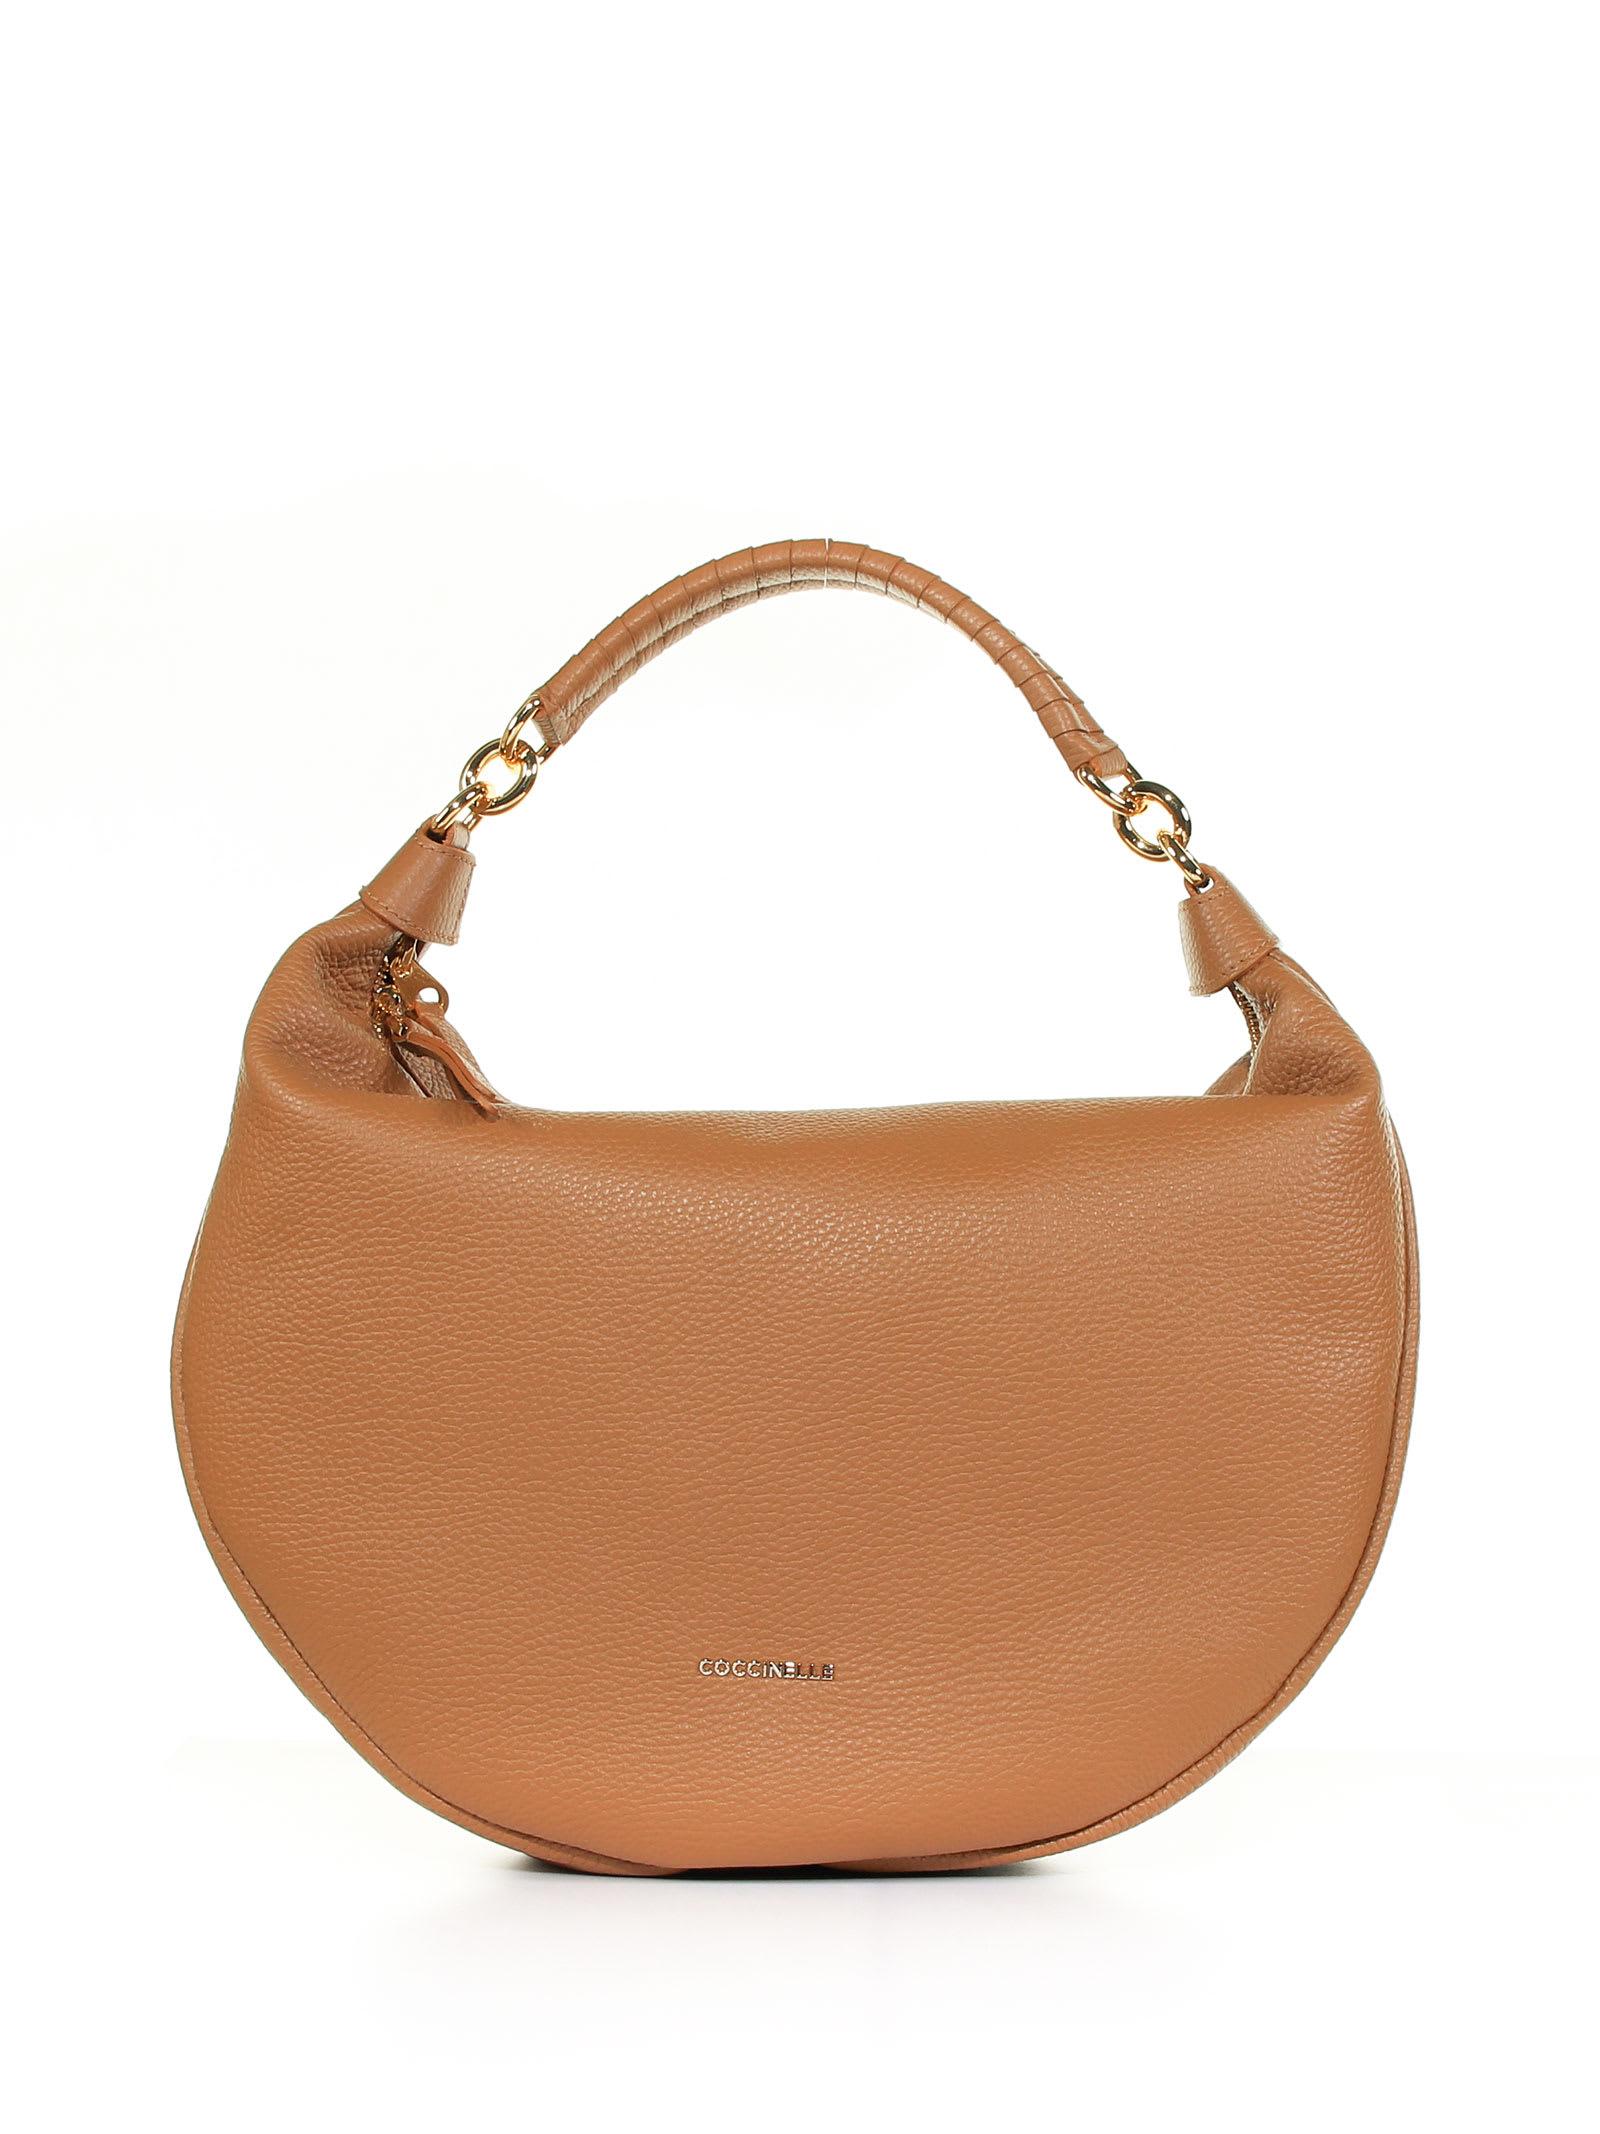 Coccinelle Melody Leather Bag in Brown | Lyst